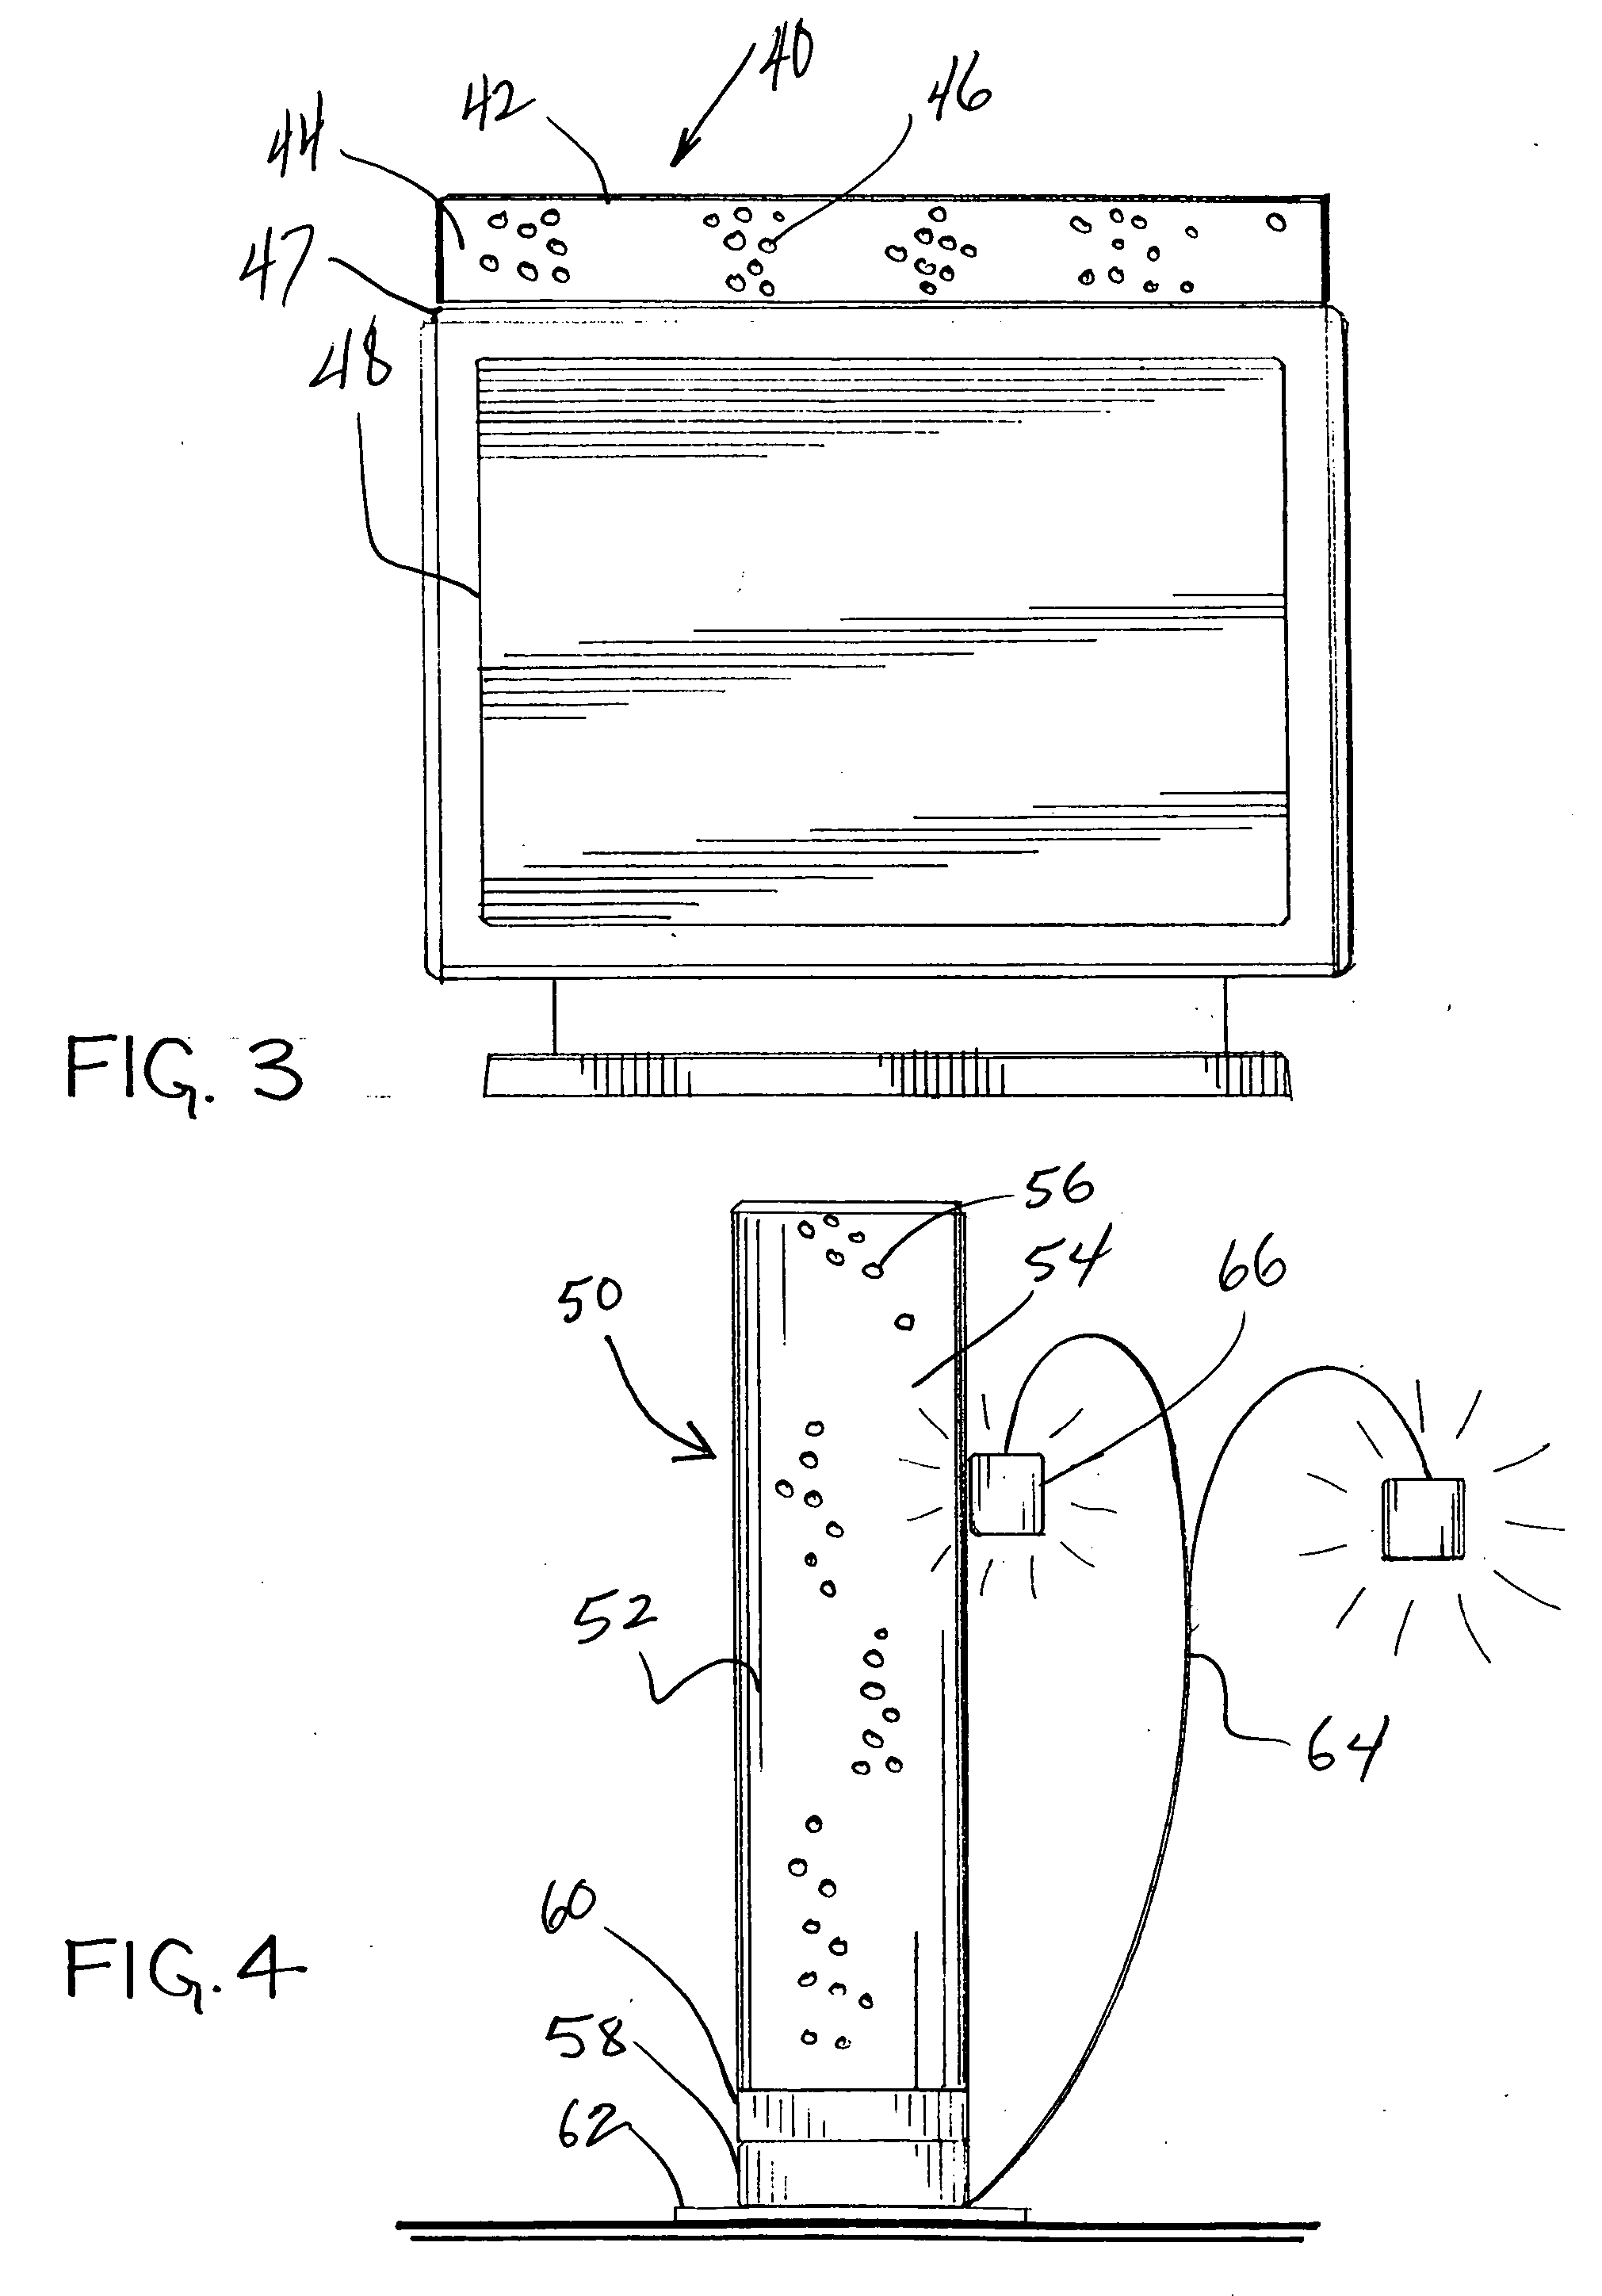 Apparatus for enhancing the aesthetic appearance of contained liquids